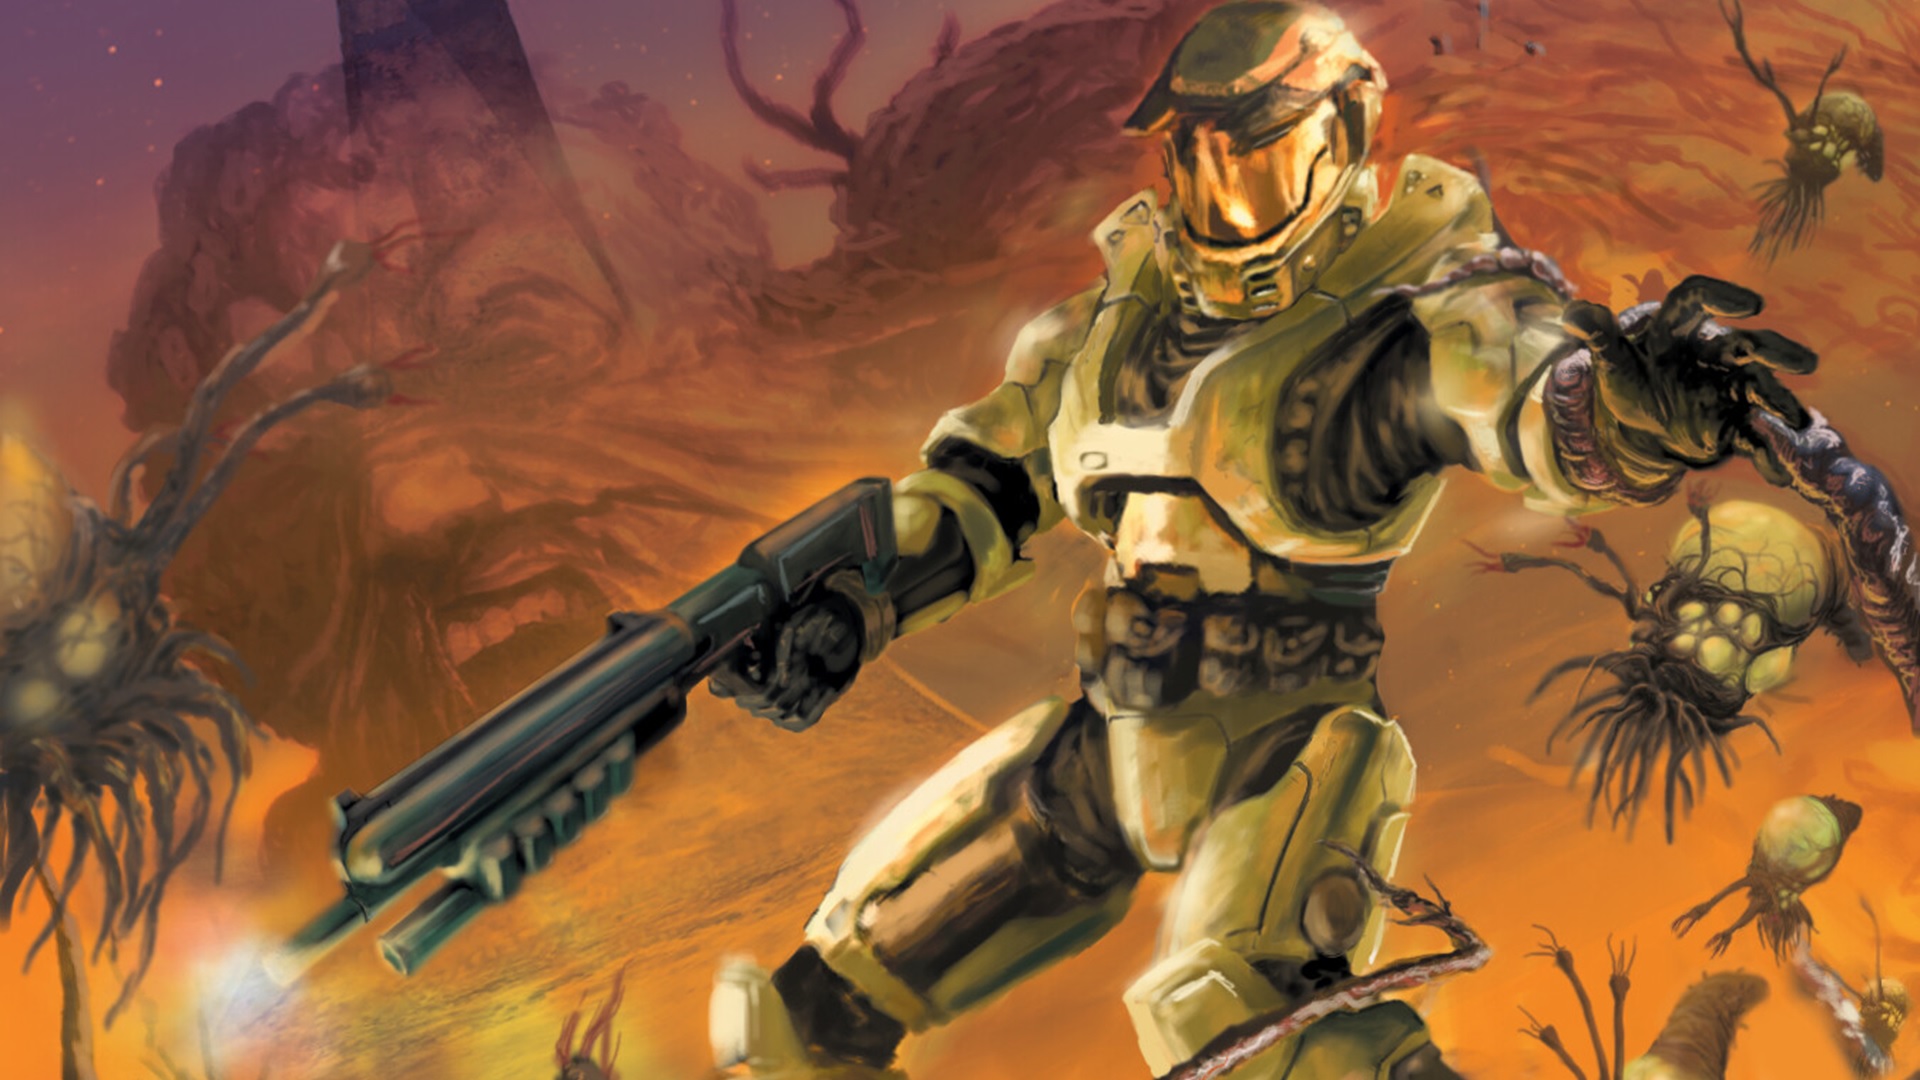 Crop of Halo: The Flood cover art showing the Master Chief surrounded by Flood infection forms